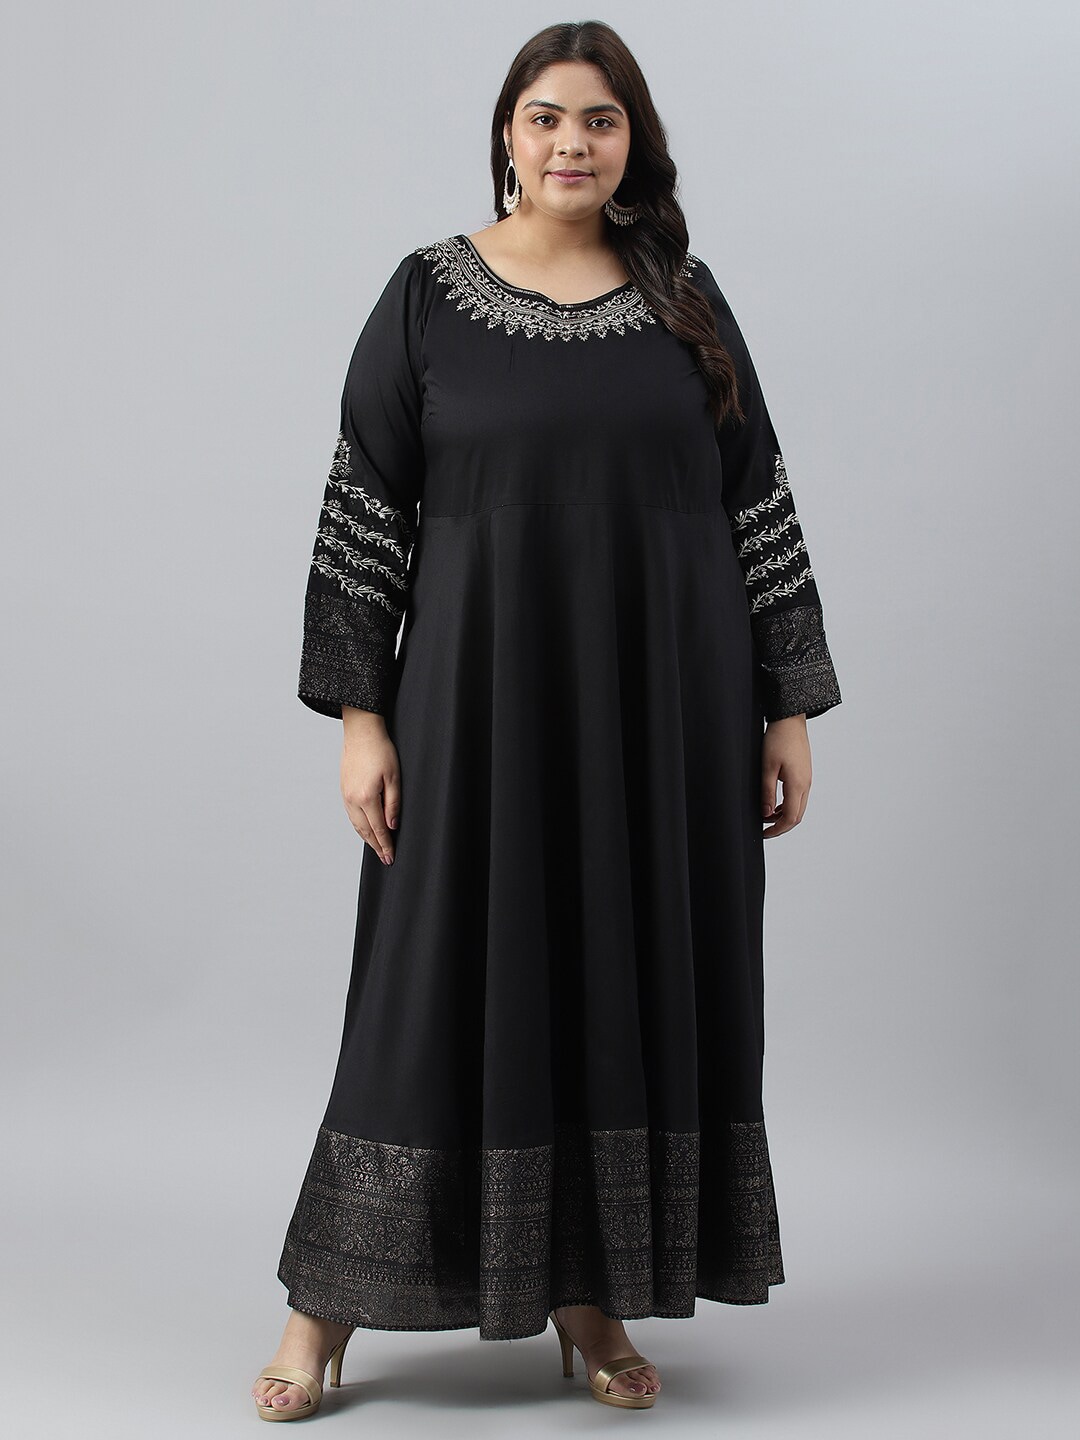 W Plus Size Floral Embroidered Ethnic Maxi Dress Price in India